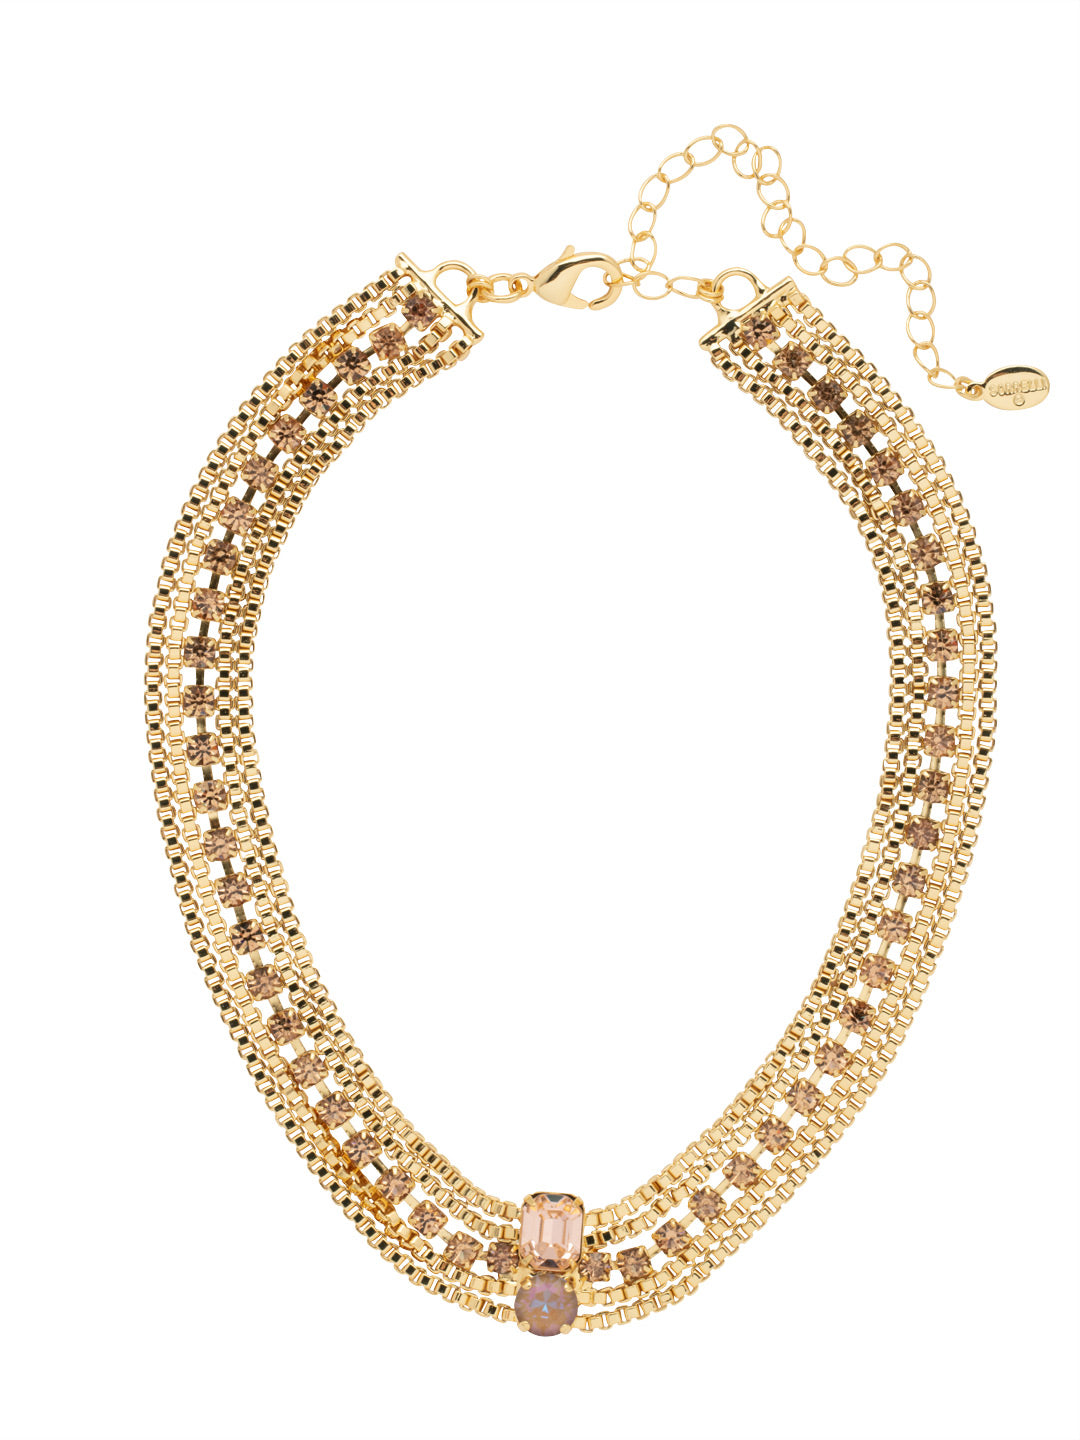 Miriam Tennis Necklace - NFC44BGRSU - <p>Adjustable and secured with a lobster claw clasp, the Miriam Tennis Necklace features box chains and crystals to create a gorgeous stated look. From Sorrelli's Raw Sugar collection in our Bright Gold-tone finish.</p>